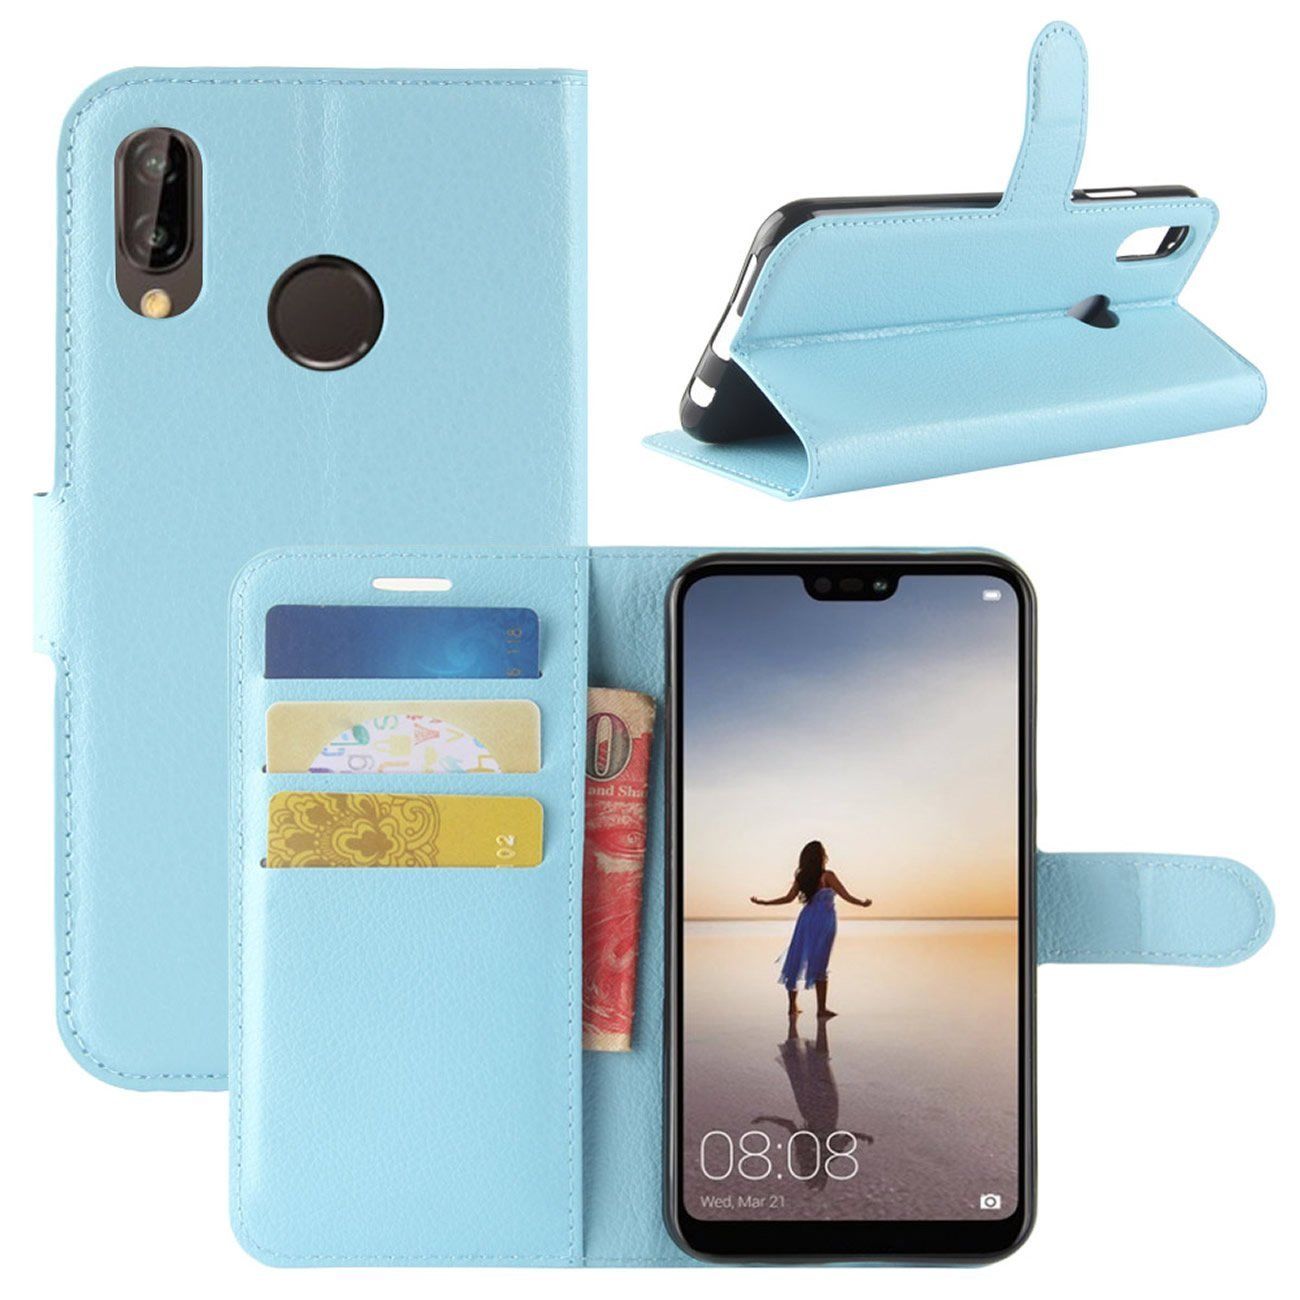 New Premium Leather Wallet Case TPU Cover For HUAWEI Nova 3e-Skyblue